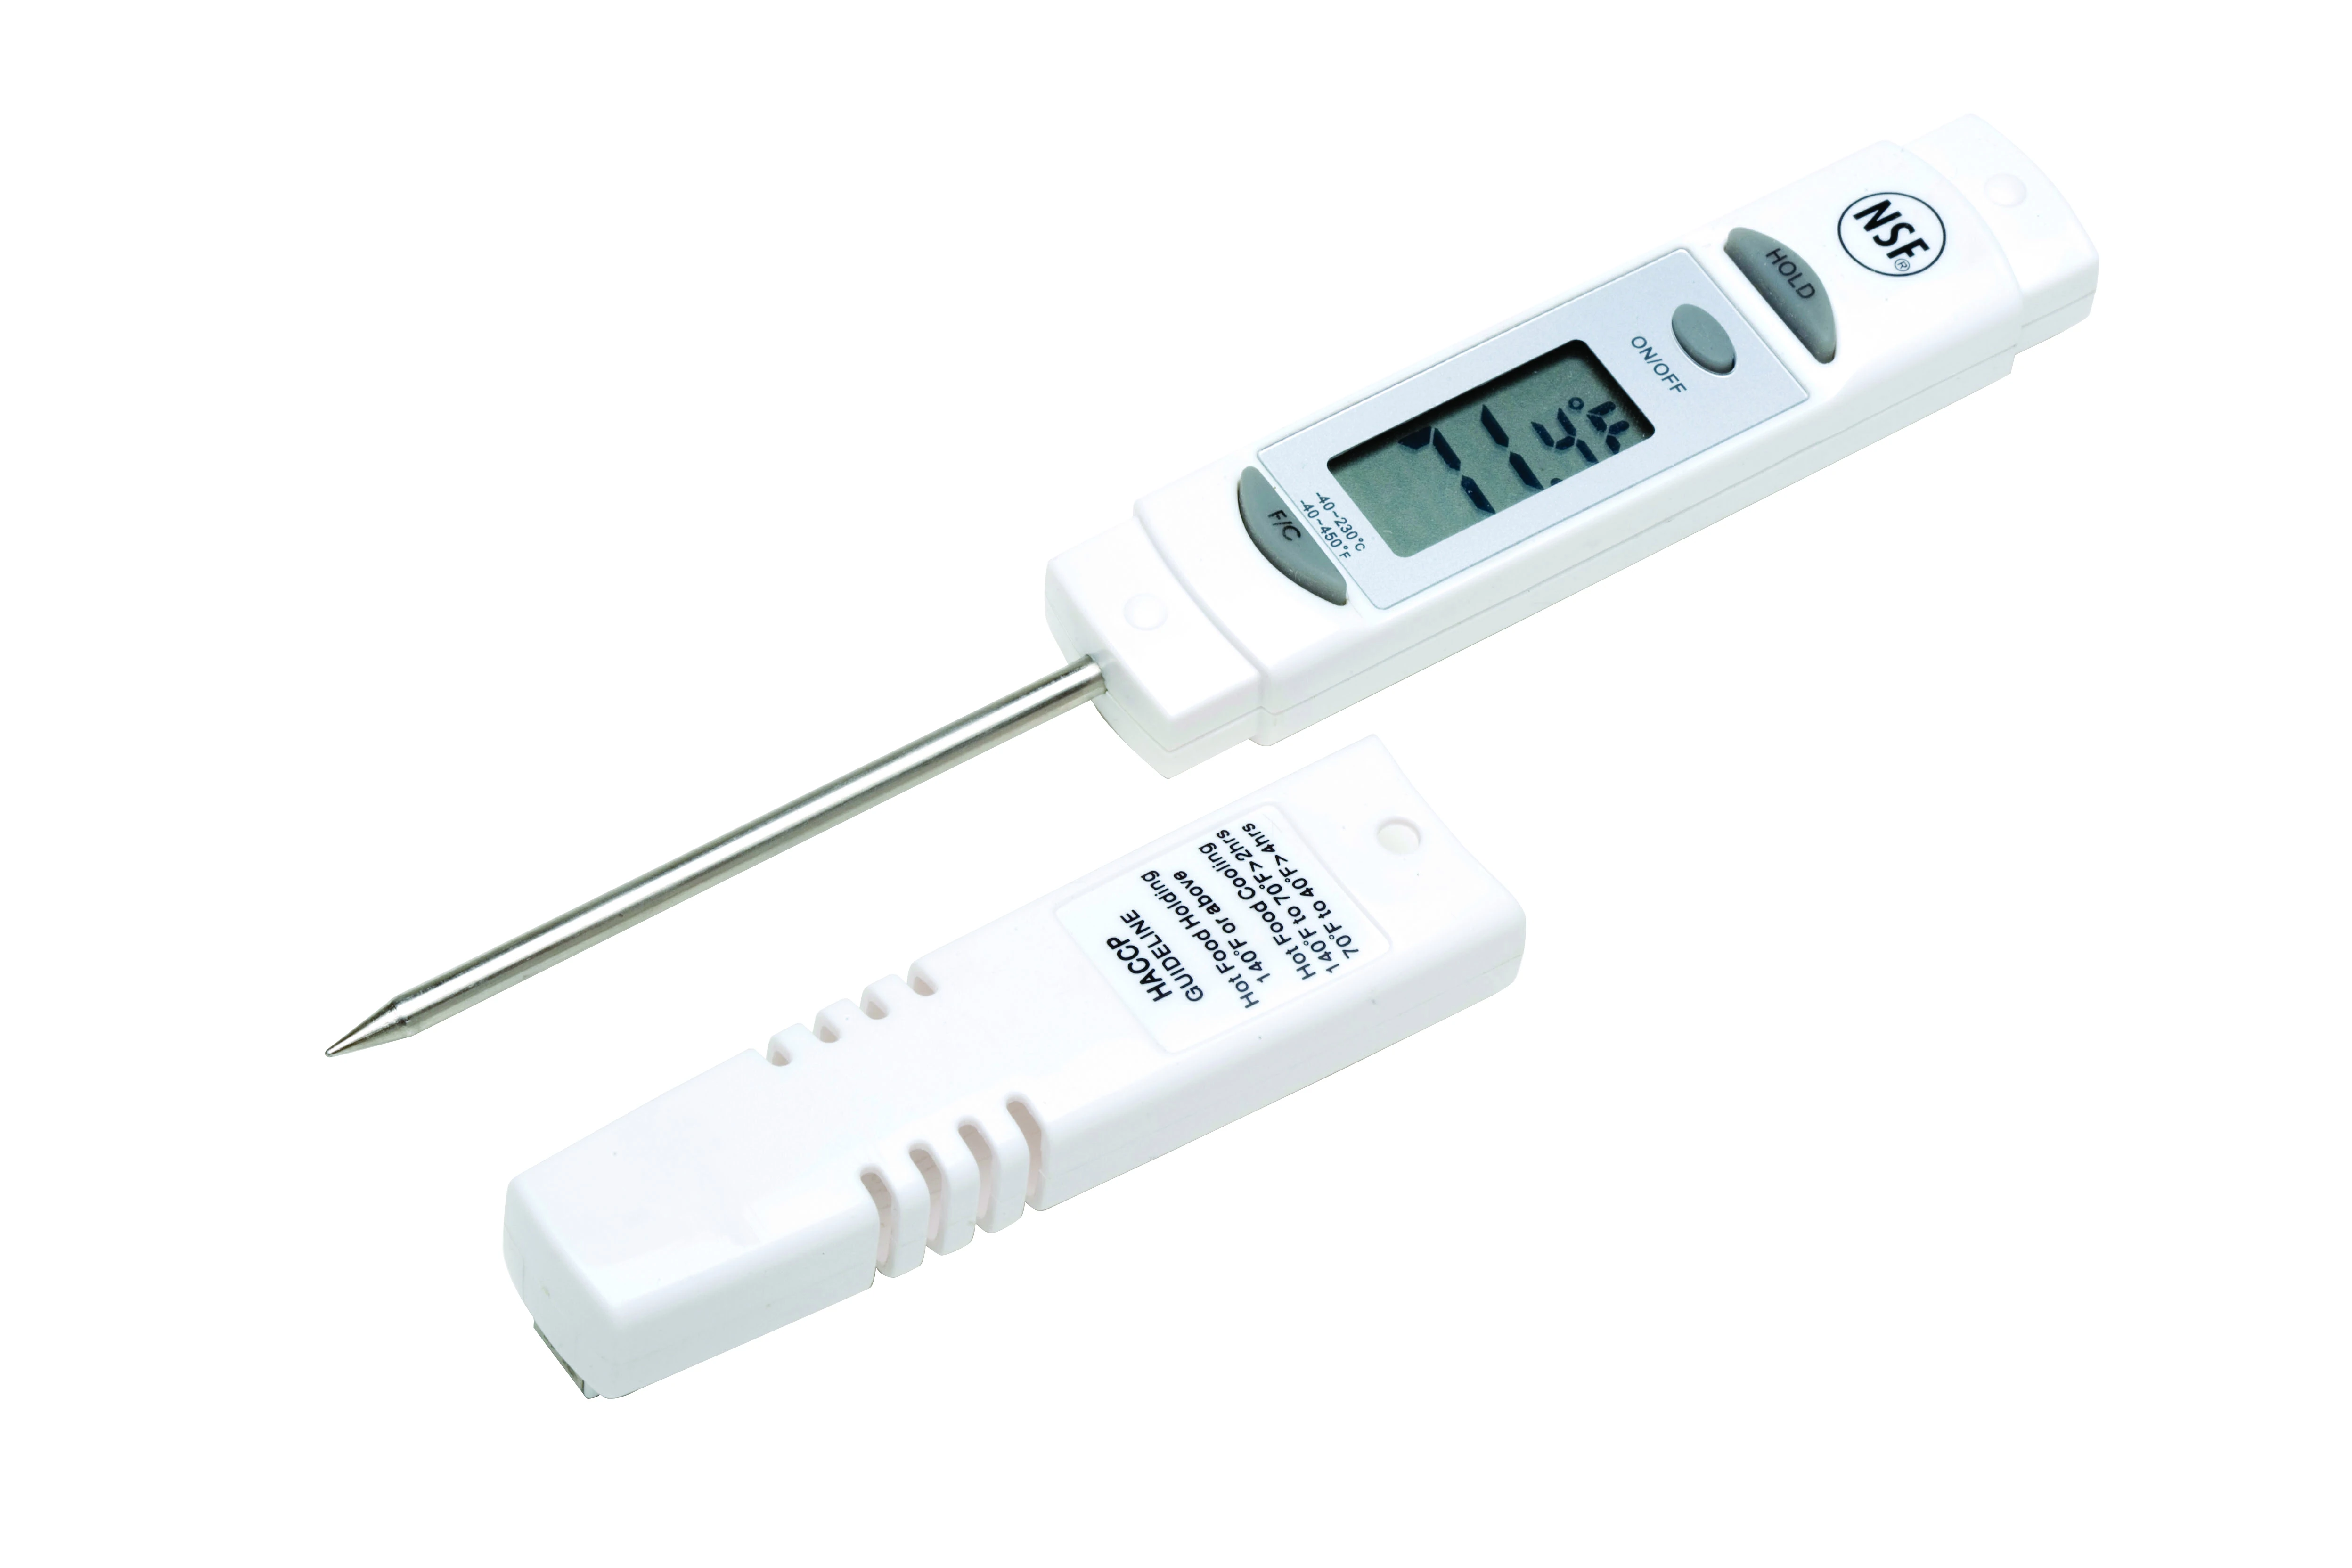 Electronic Pocket Thermometer -40 To 230C